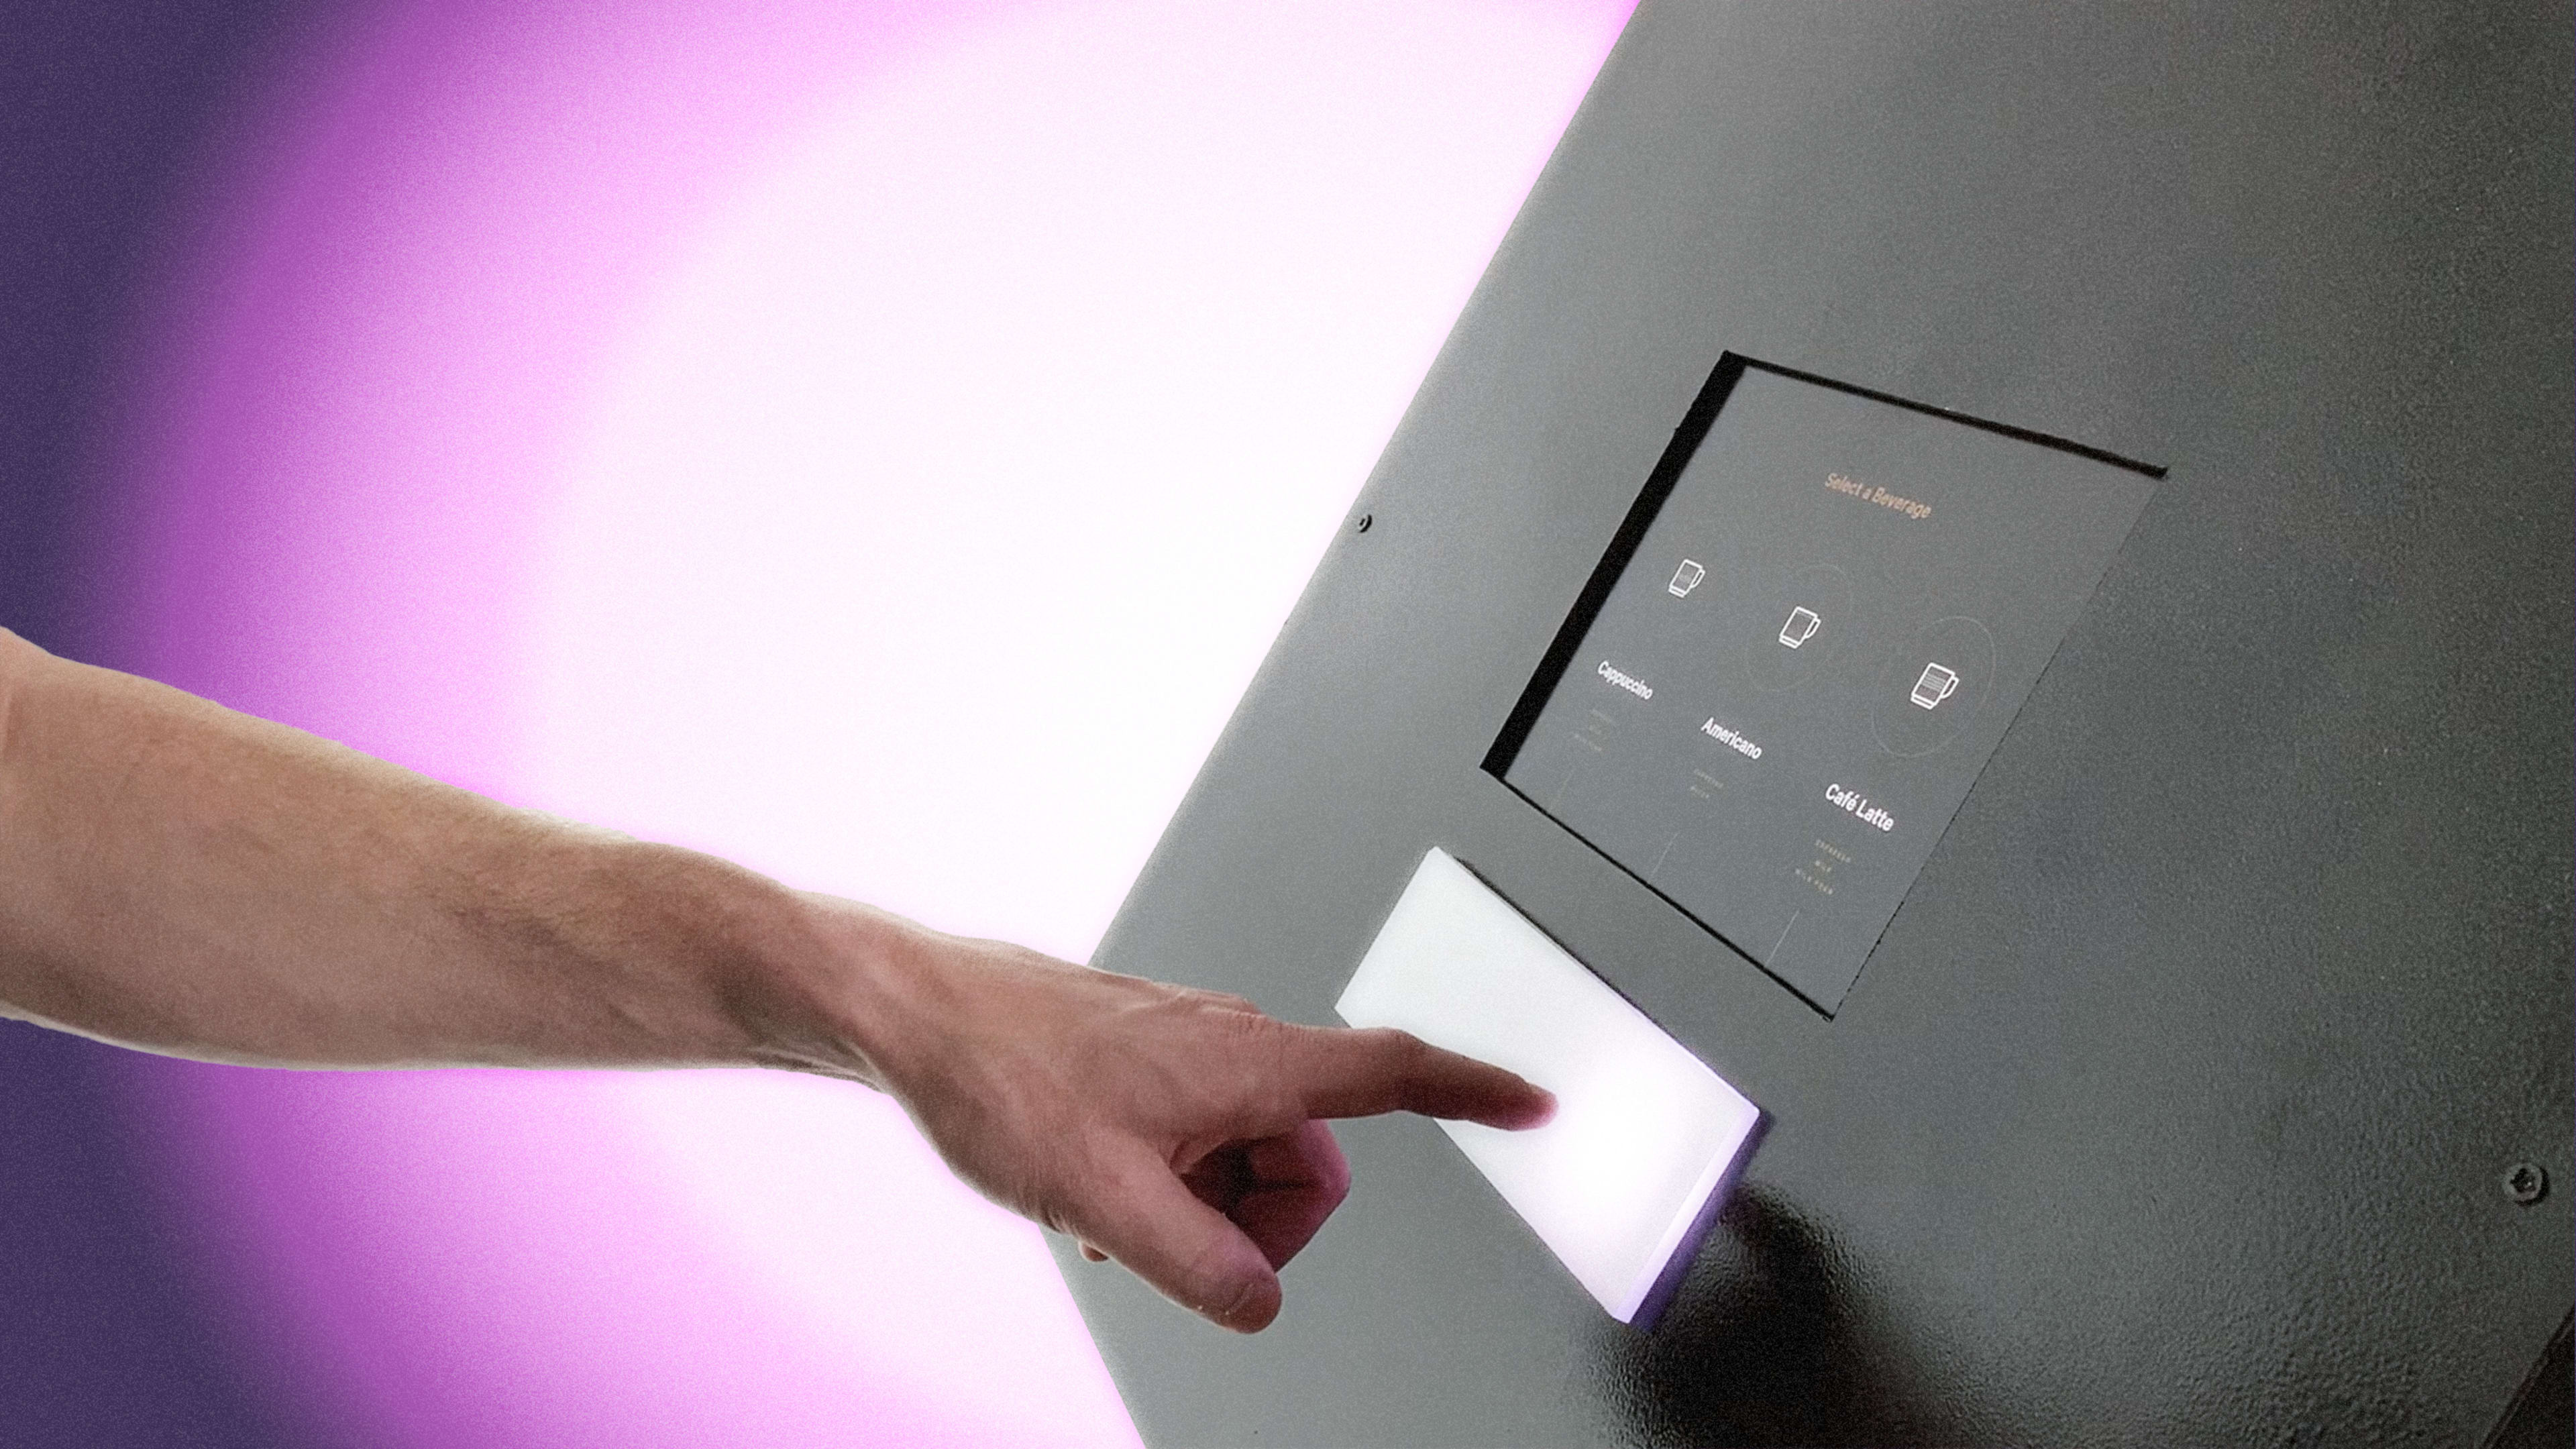 Zero-touch technology could make it safe to use elevators and ATMs again